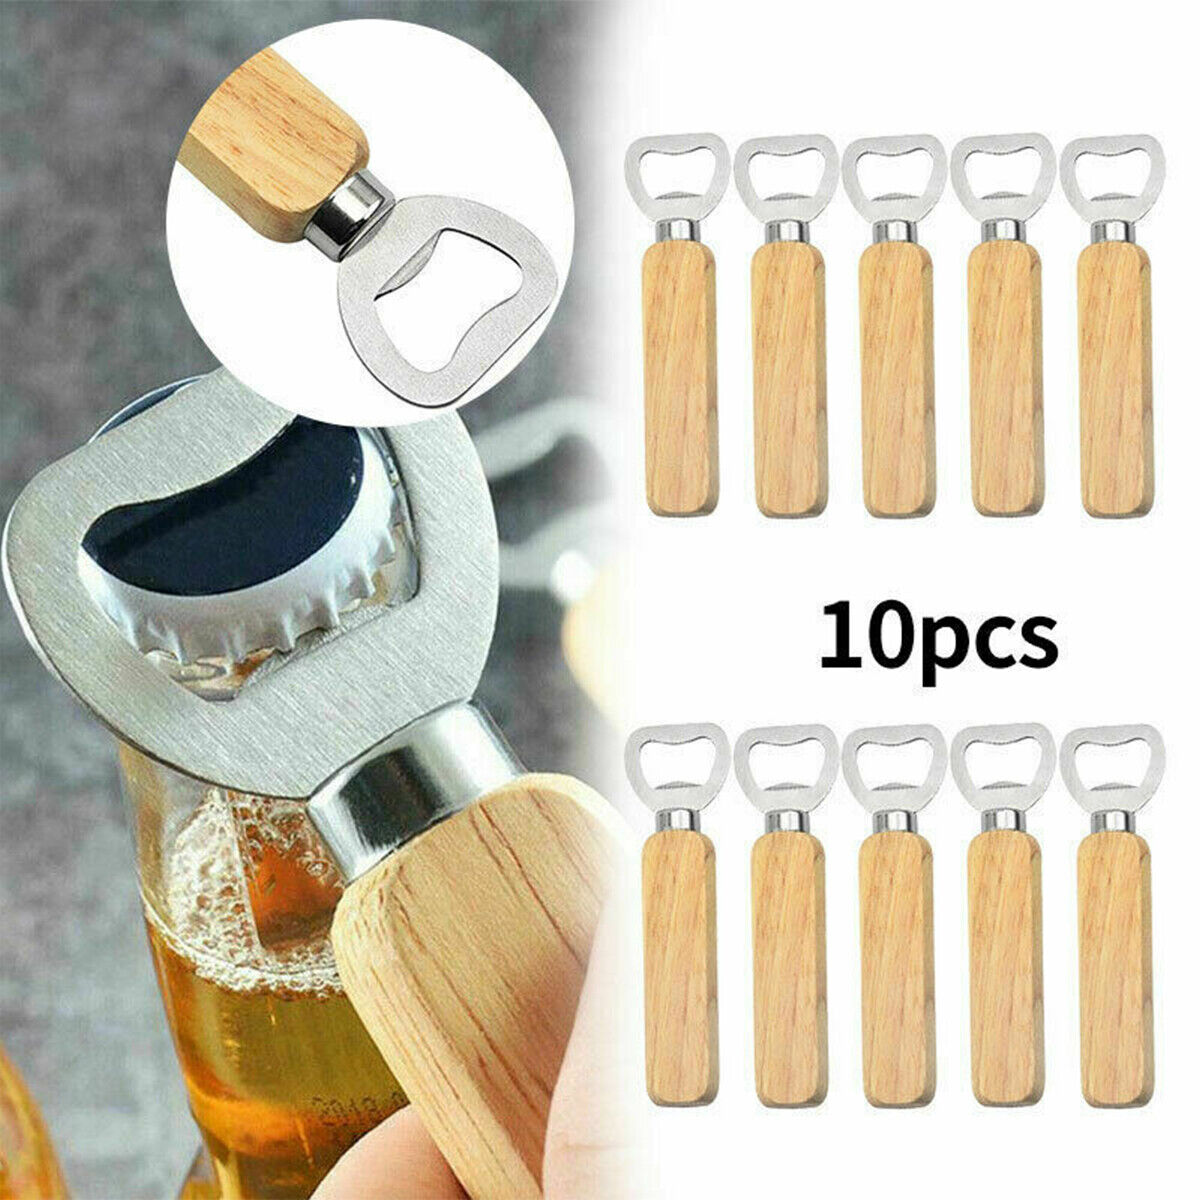 10PCS Wooden Beer Soda Bottle Opener Drink Push Down Cap Bar Party Tools Home ❖